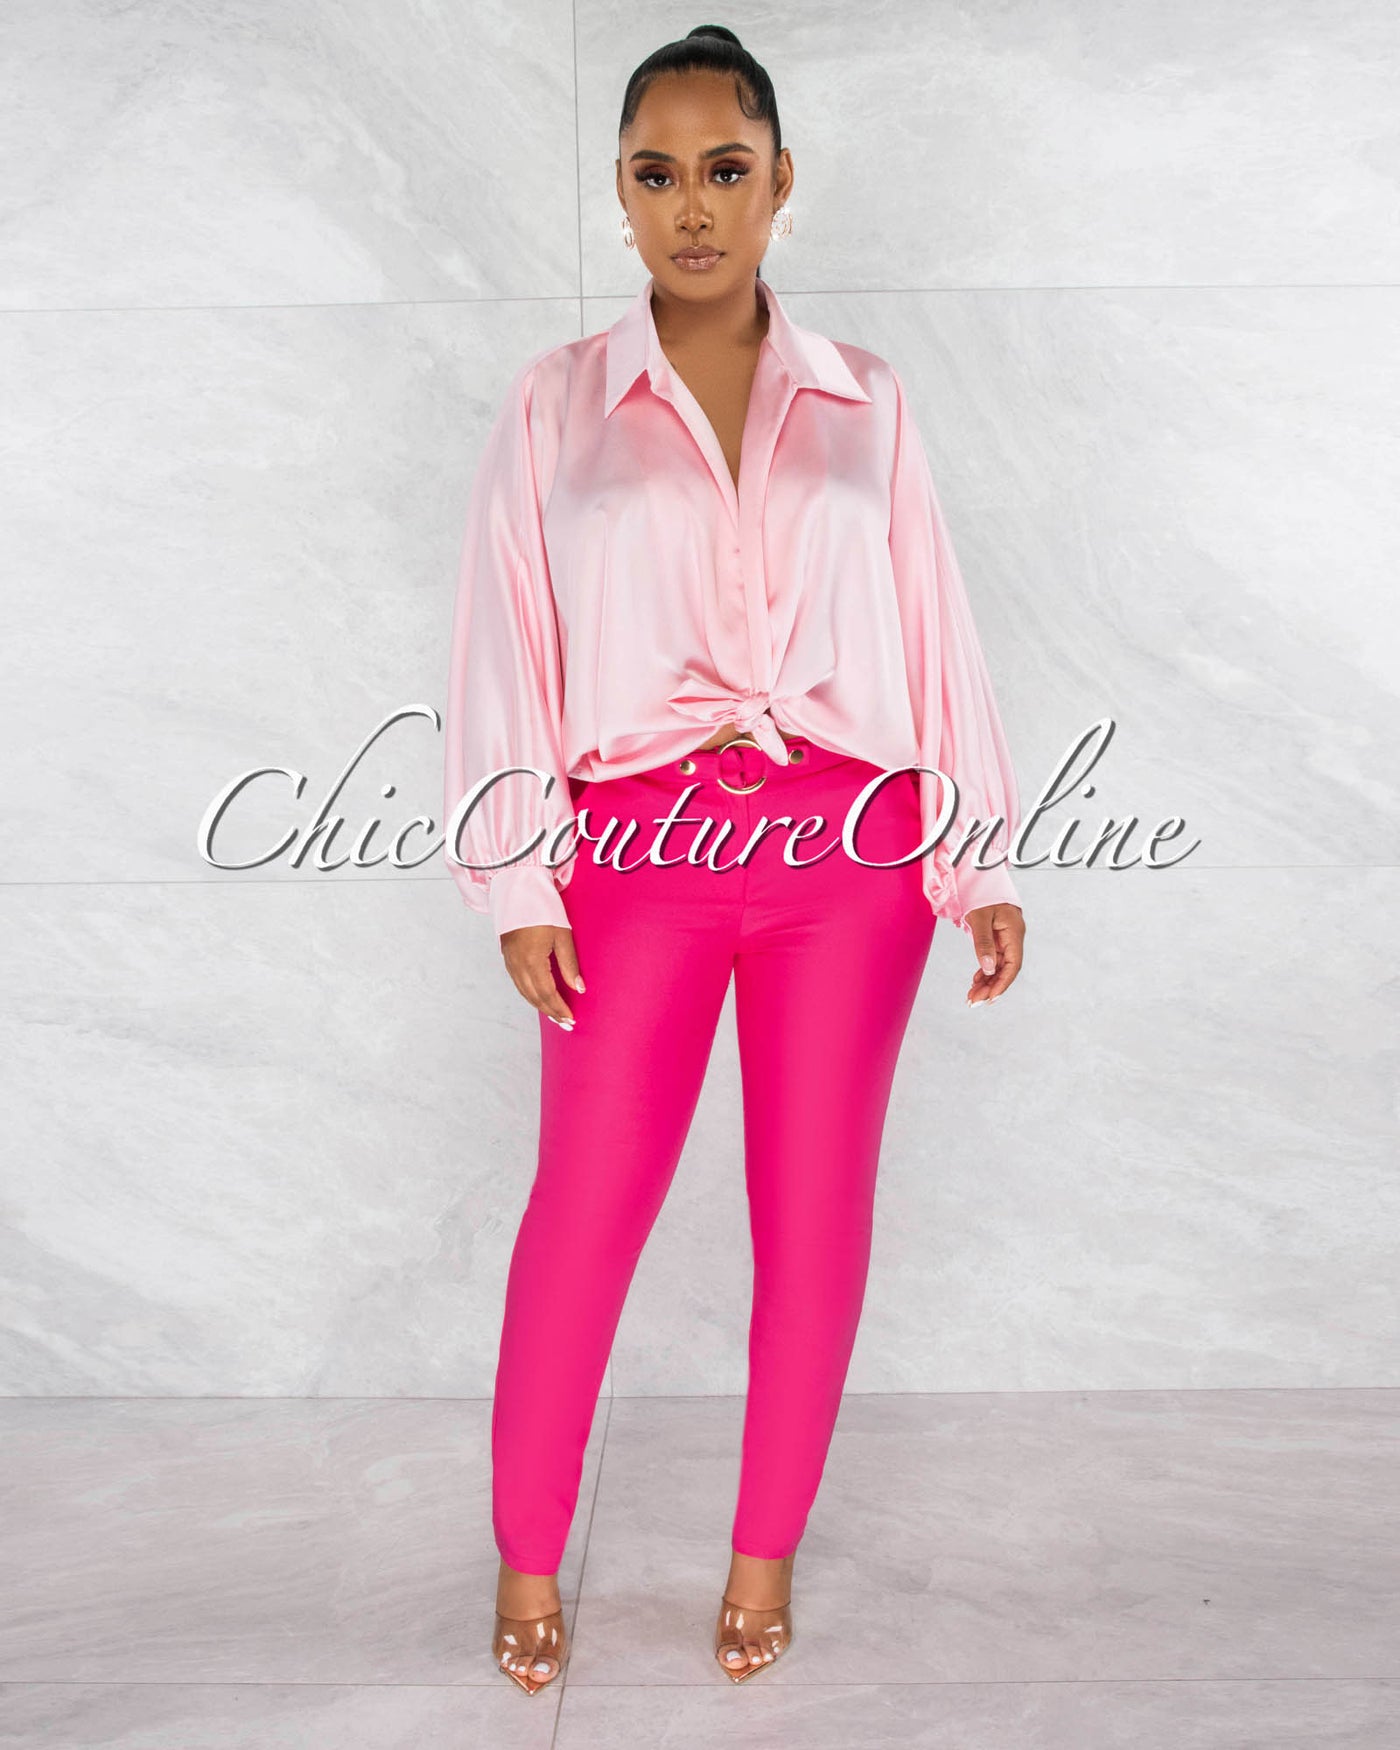 Pilar Baby Pink Wide Sleeves Silky Blouse